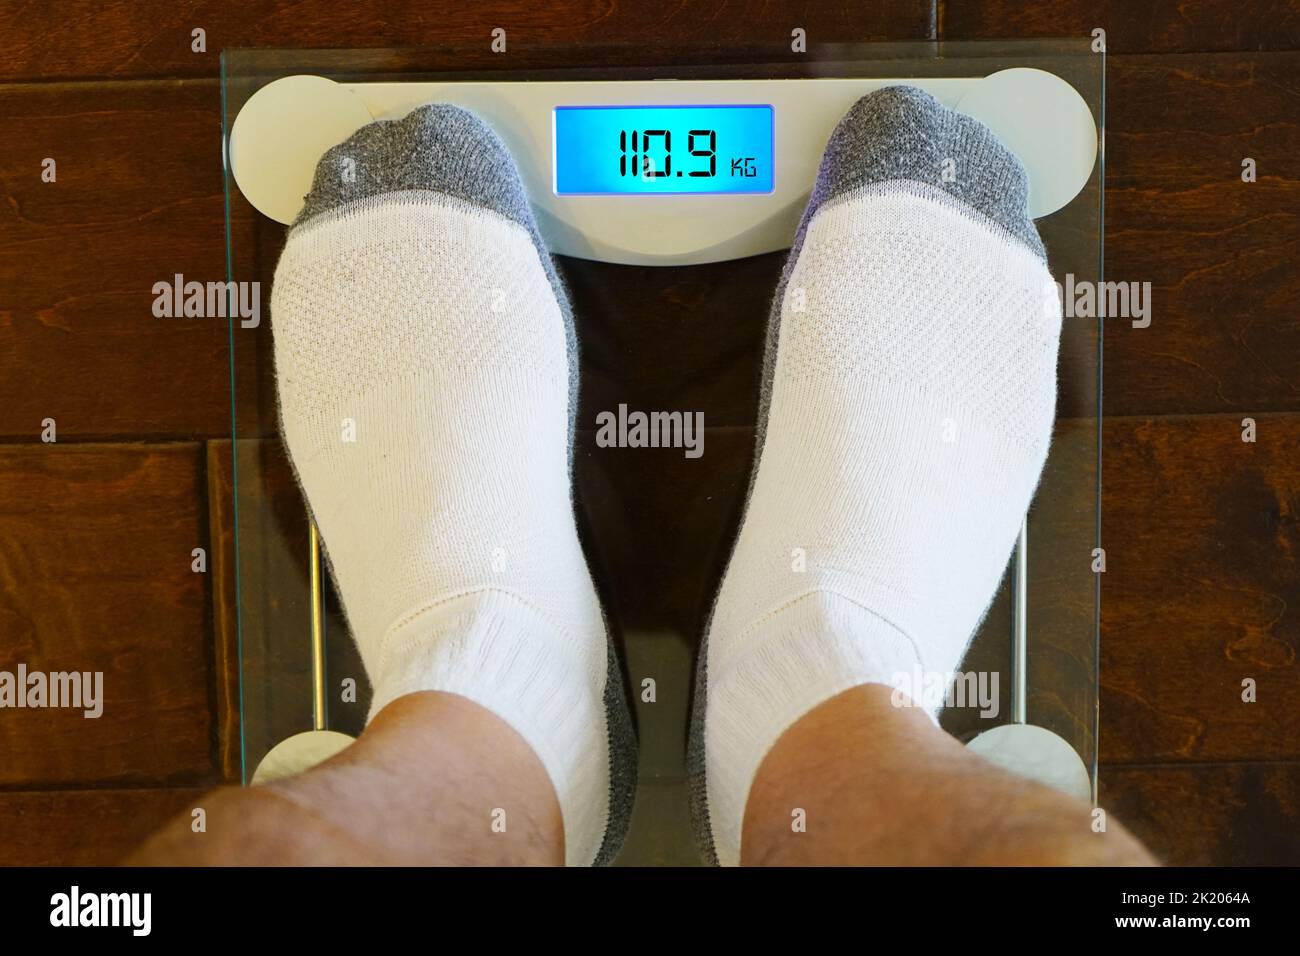 https://c8.alamy.com/comp/2K2064A/man-standing-on-the-digital-weight-scale-with-unhealthy-weight-in-kilograms-2K2064A.jpg